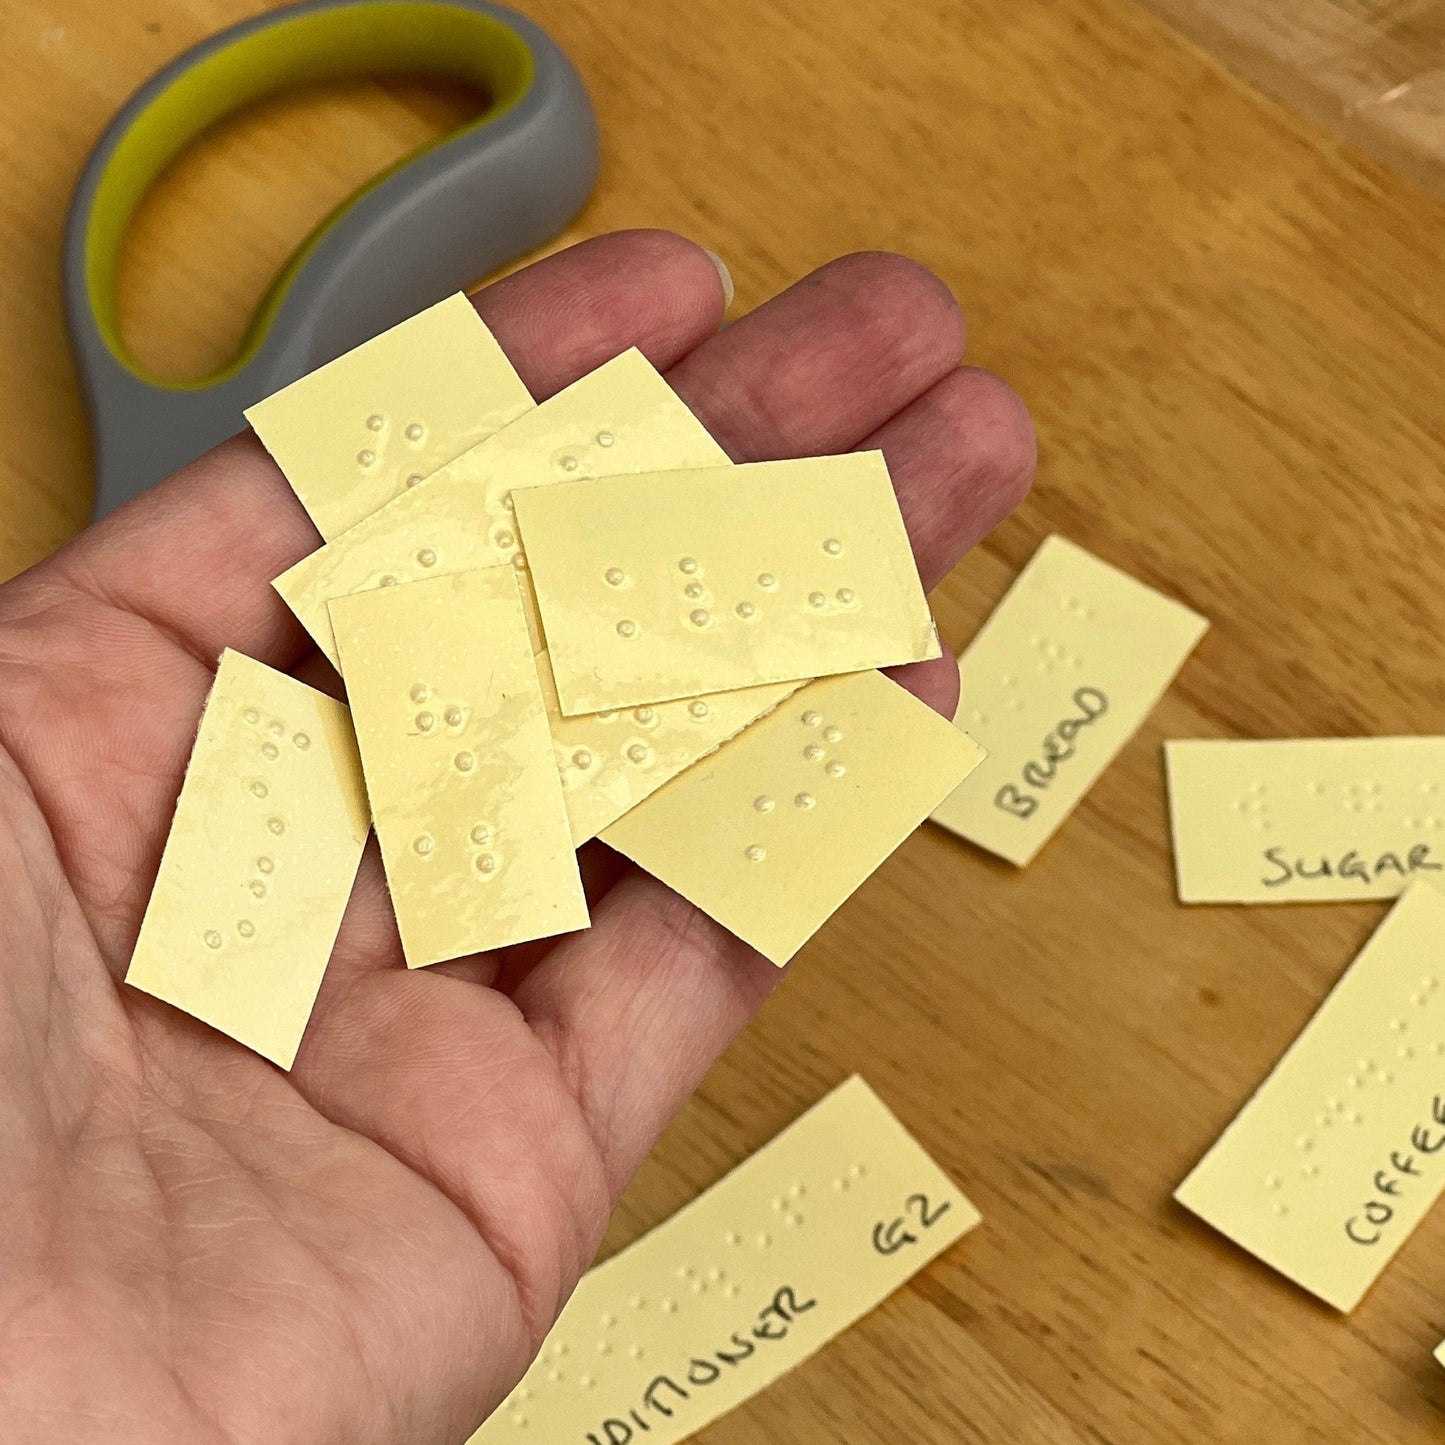 Image shows my hand holding some of the braille labels I have printed, in the background you can see the reverse of the labels where I have written what each labels says and whether grade 1 or grade 2. You can also see the top of a pair of scissors.